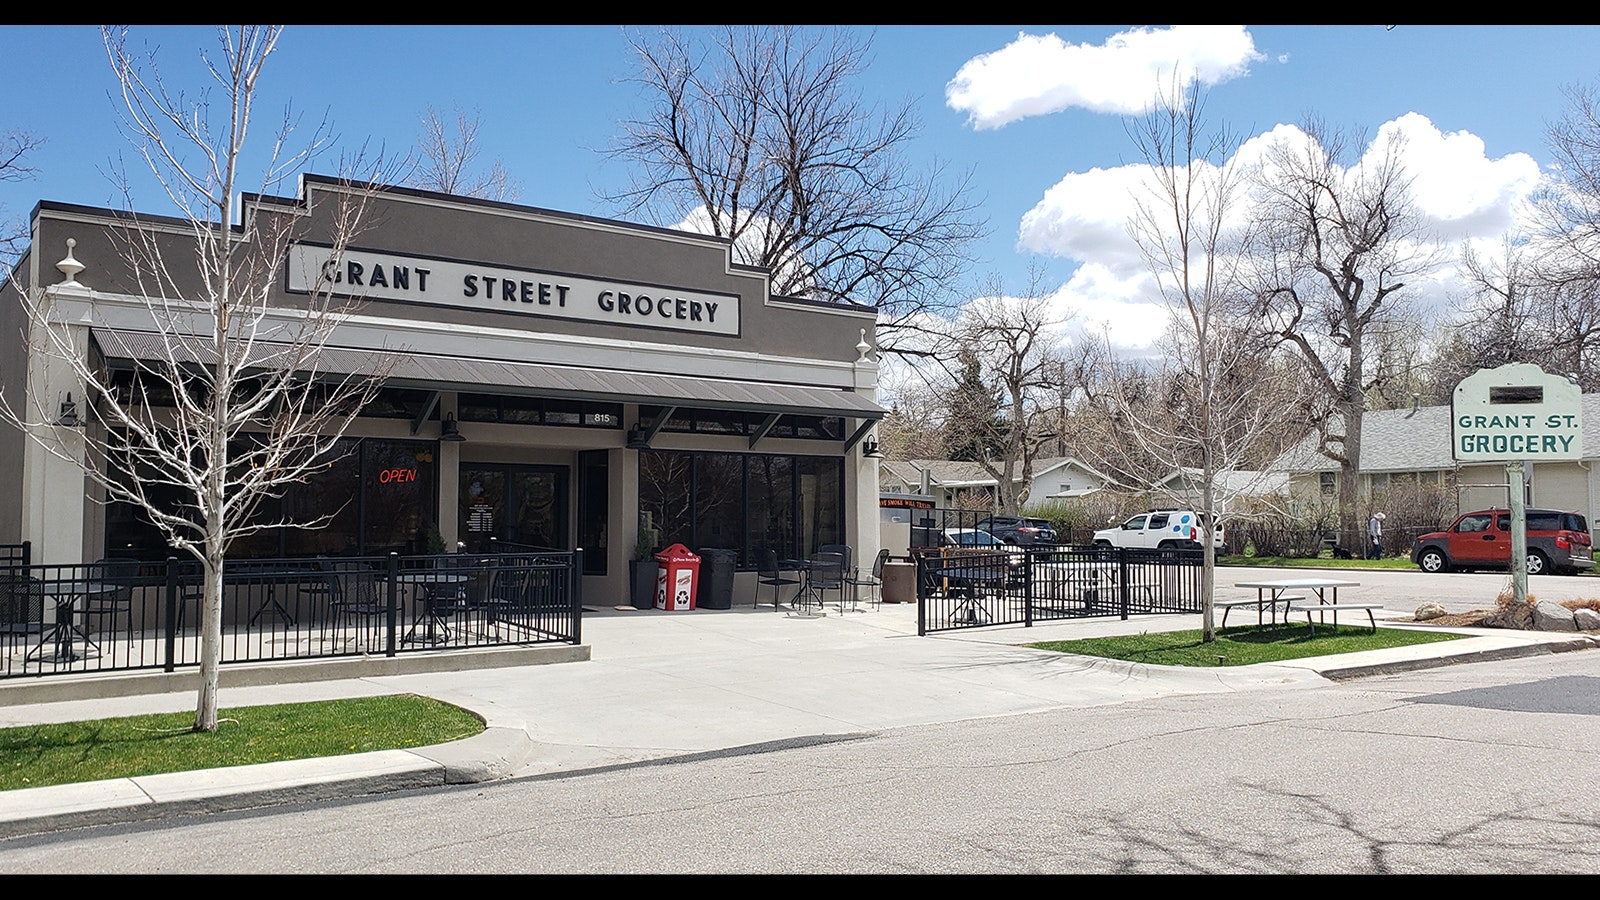 Grant Street Grocery in Casper is 105 years old, but it almost didn't make it this far.